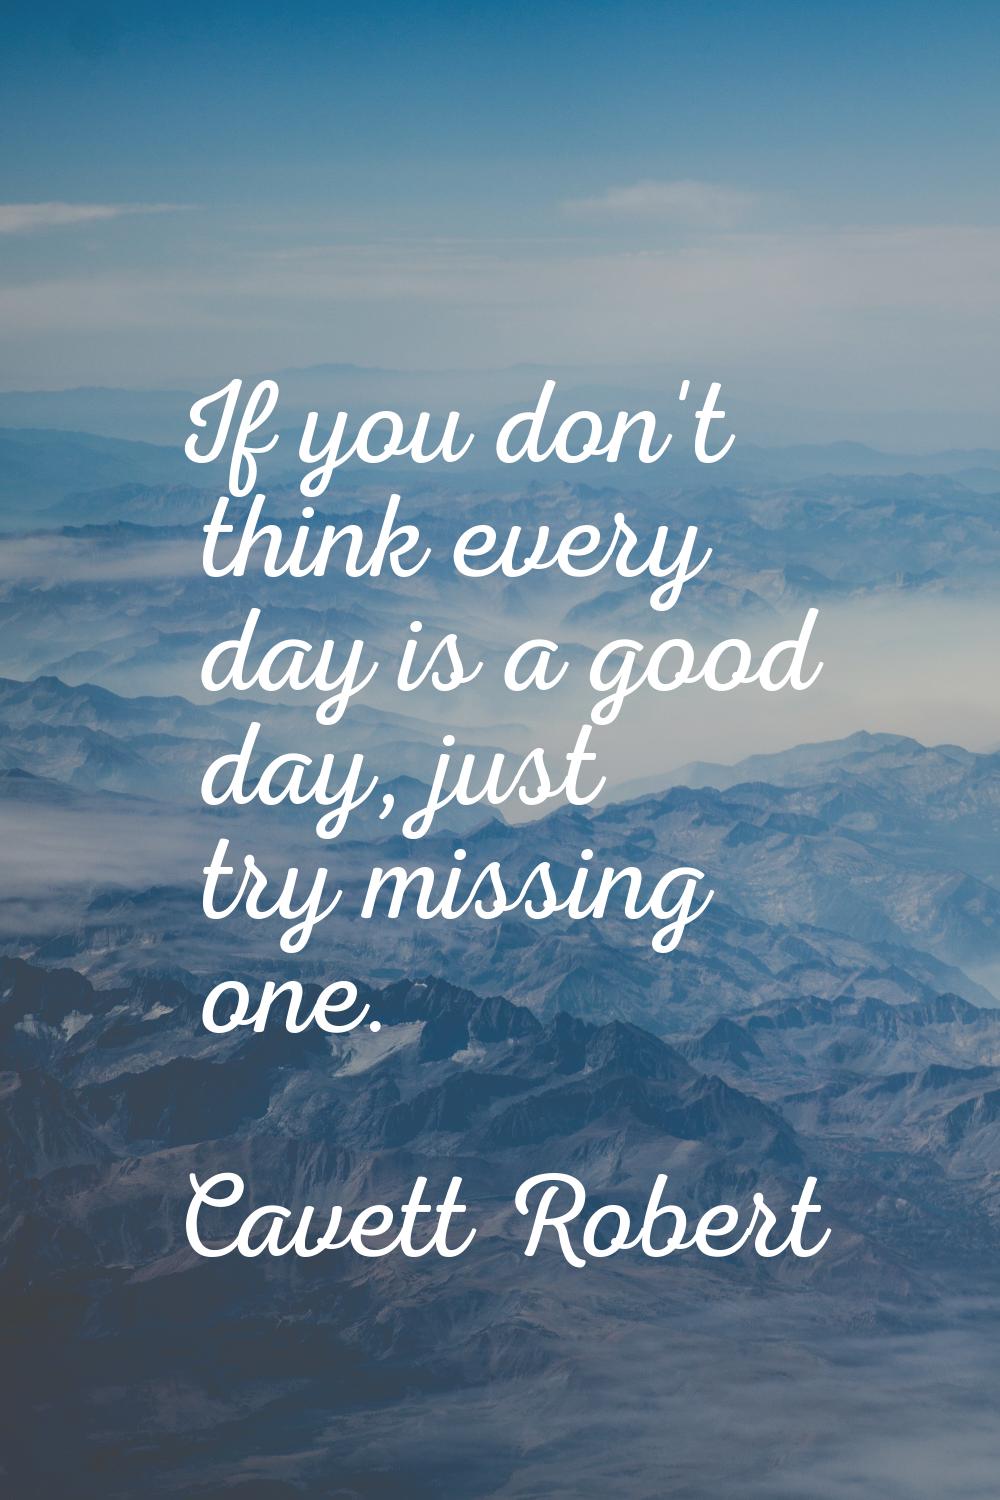 If you don't think every day is a good day, just try missing one.